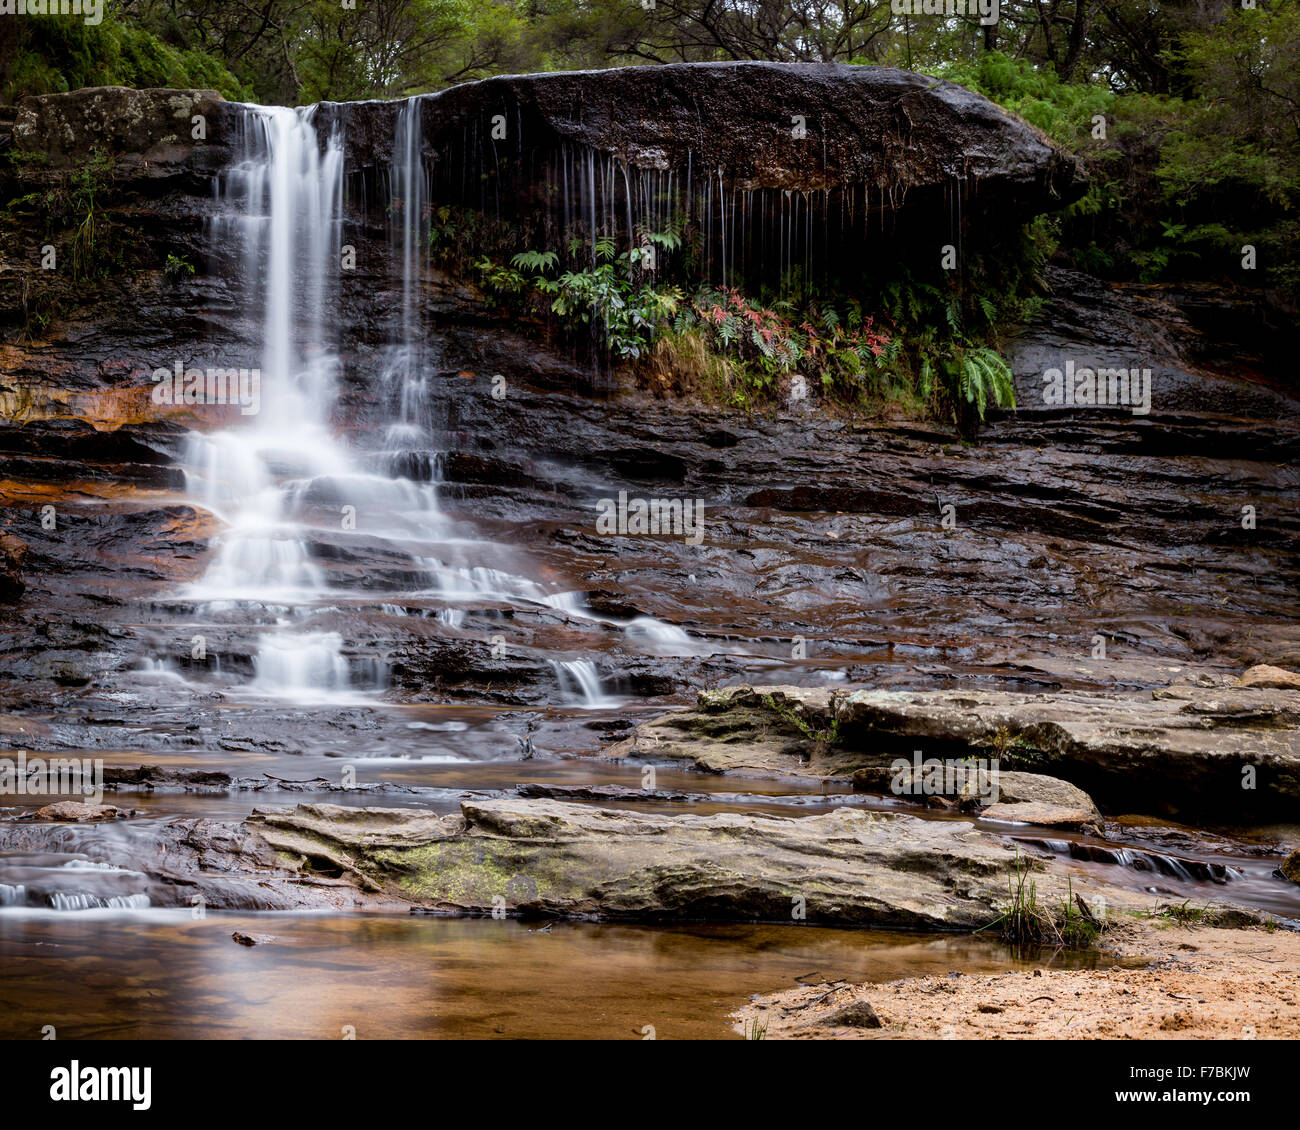 Weeping falls which is situated in the uppoer Wentworth Falls, Blue Mountains, NSW, Australia Stock Photo